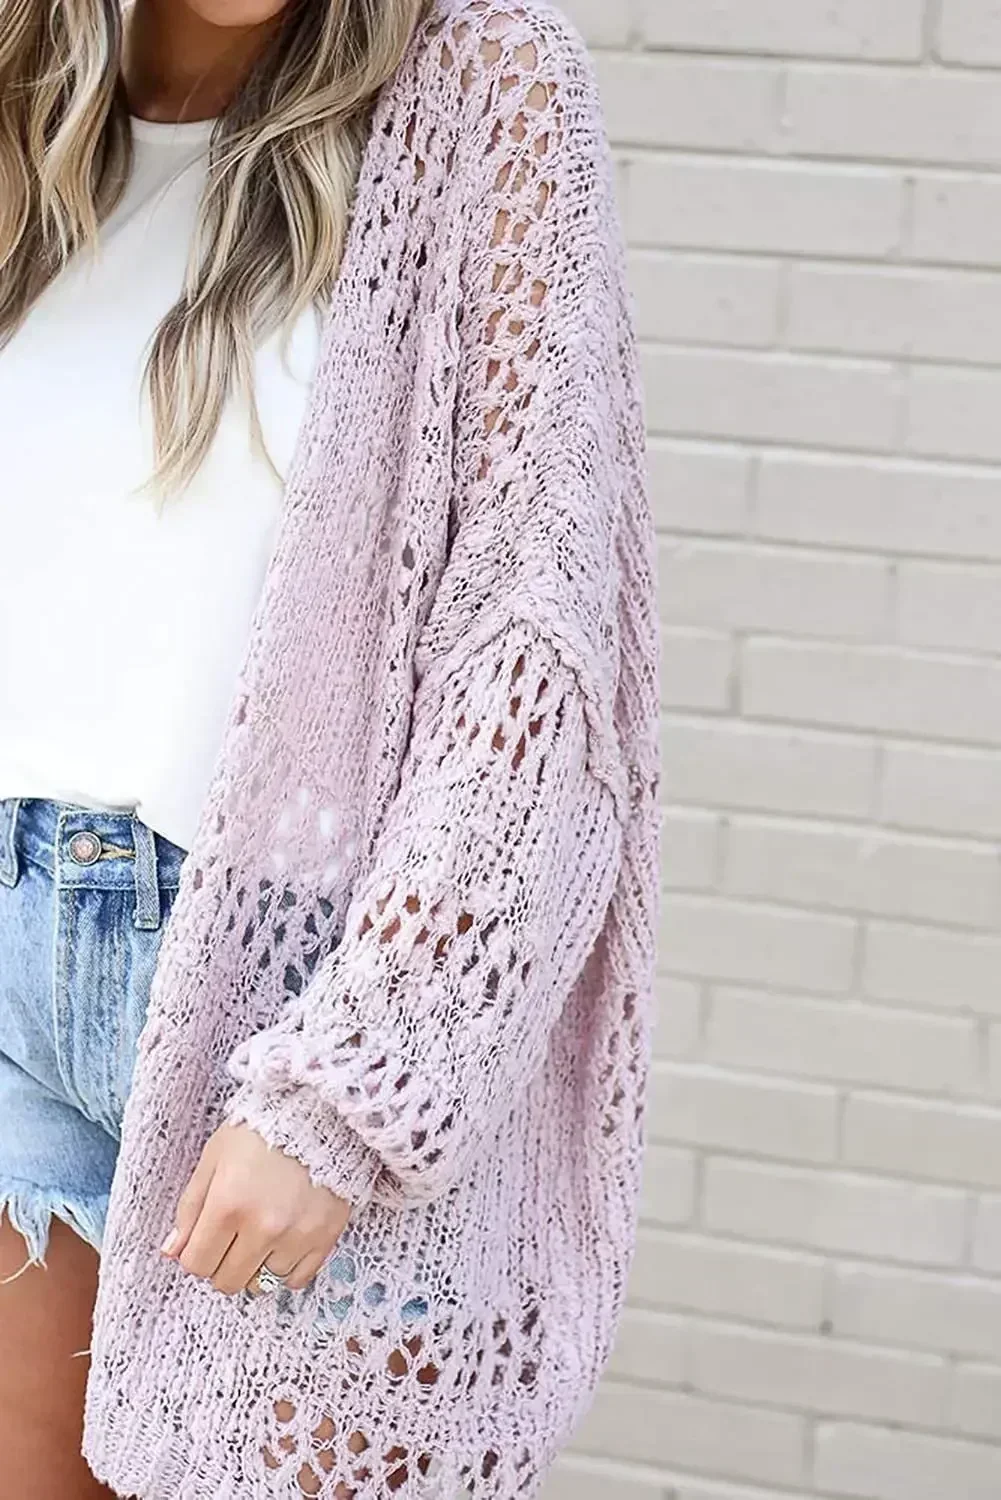 long crochet cardigan Women Cardigan Open stitch Sweater Hollow out Long Sleeve cardigan for women autumn solid outwear clothes images - 6